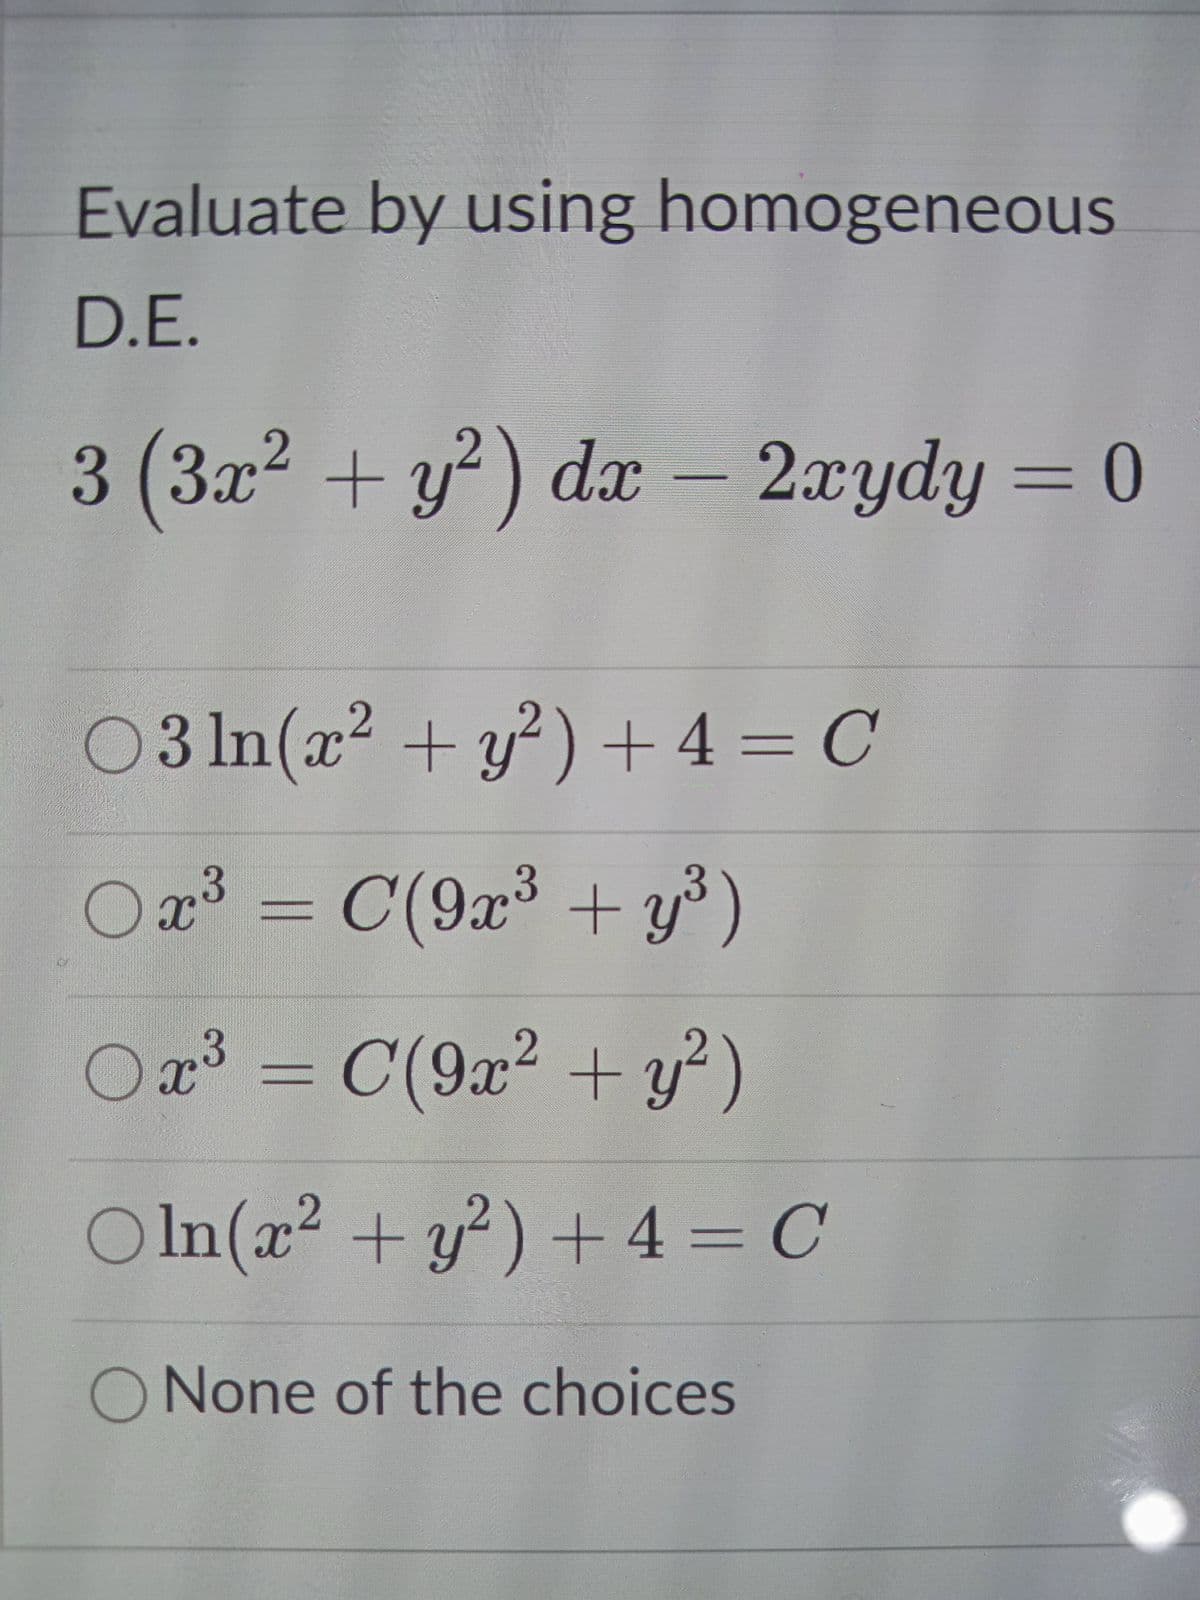 Evaluate by using homogeneous
D.E.
3 (3x2 + y? ) dx – 2xydy = 0
03 In(x2 + y?)+4= C
+4%=
O 23 = C(9x³ + y³)
3D(
Oa³ = C(9x² + y²)
%3D
OIn
O In (x2 +y?) + 4 = C
O None of the choices
